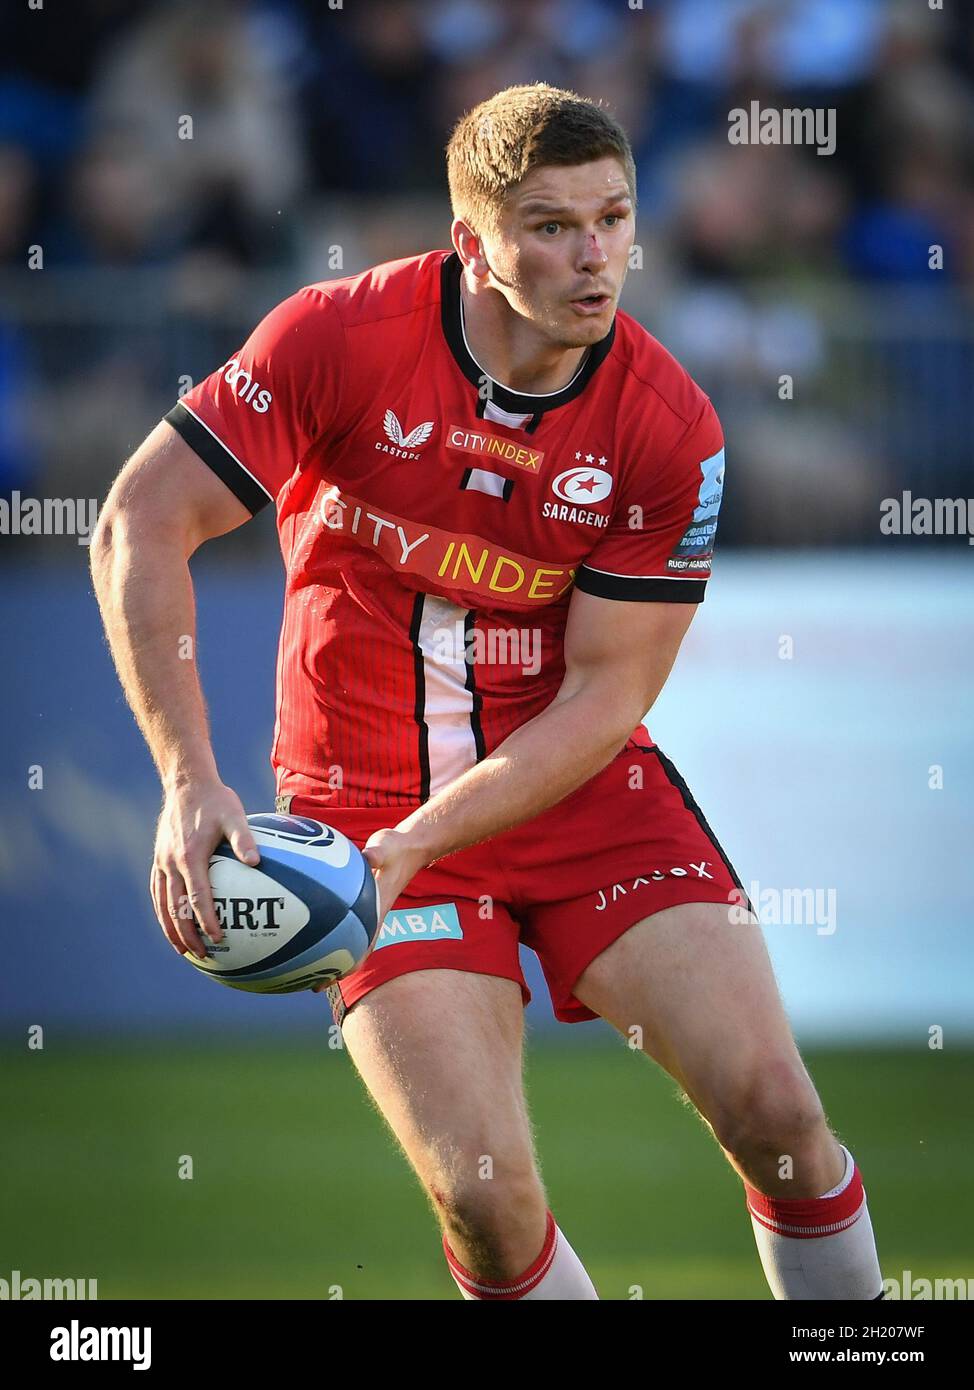 The Recreation Ground, Bath, England, UK. 17th October, 2021. Saracens' Owen Farrell in action during the Gallagher English Premiership match between Bath Rugby and Saracens: Credit: Ashley Western/Alamy Live News Stock Photo